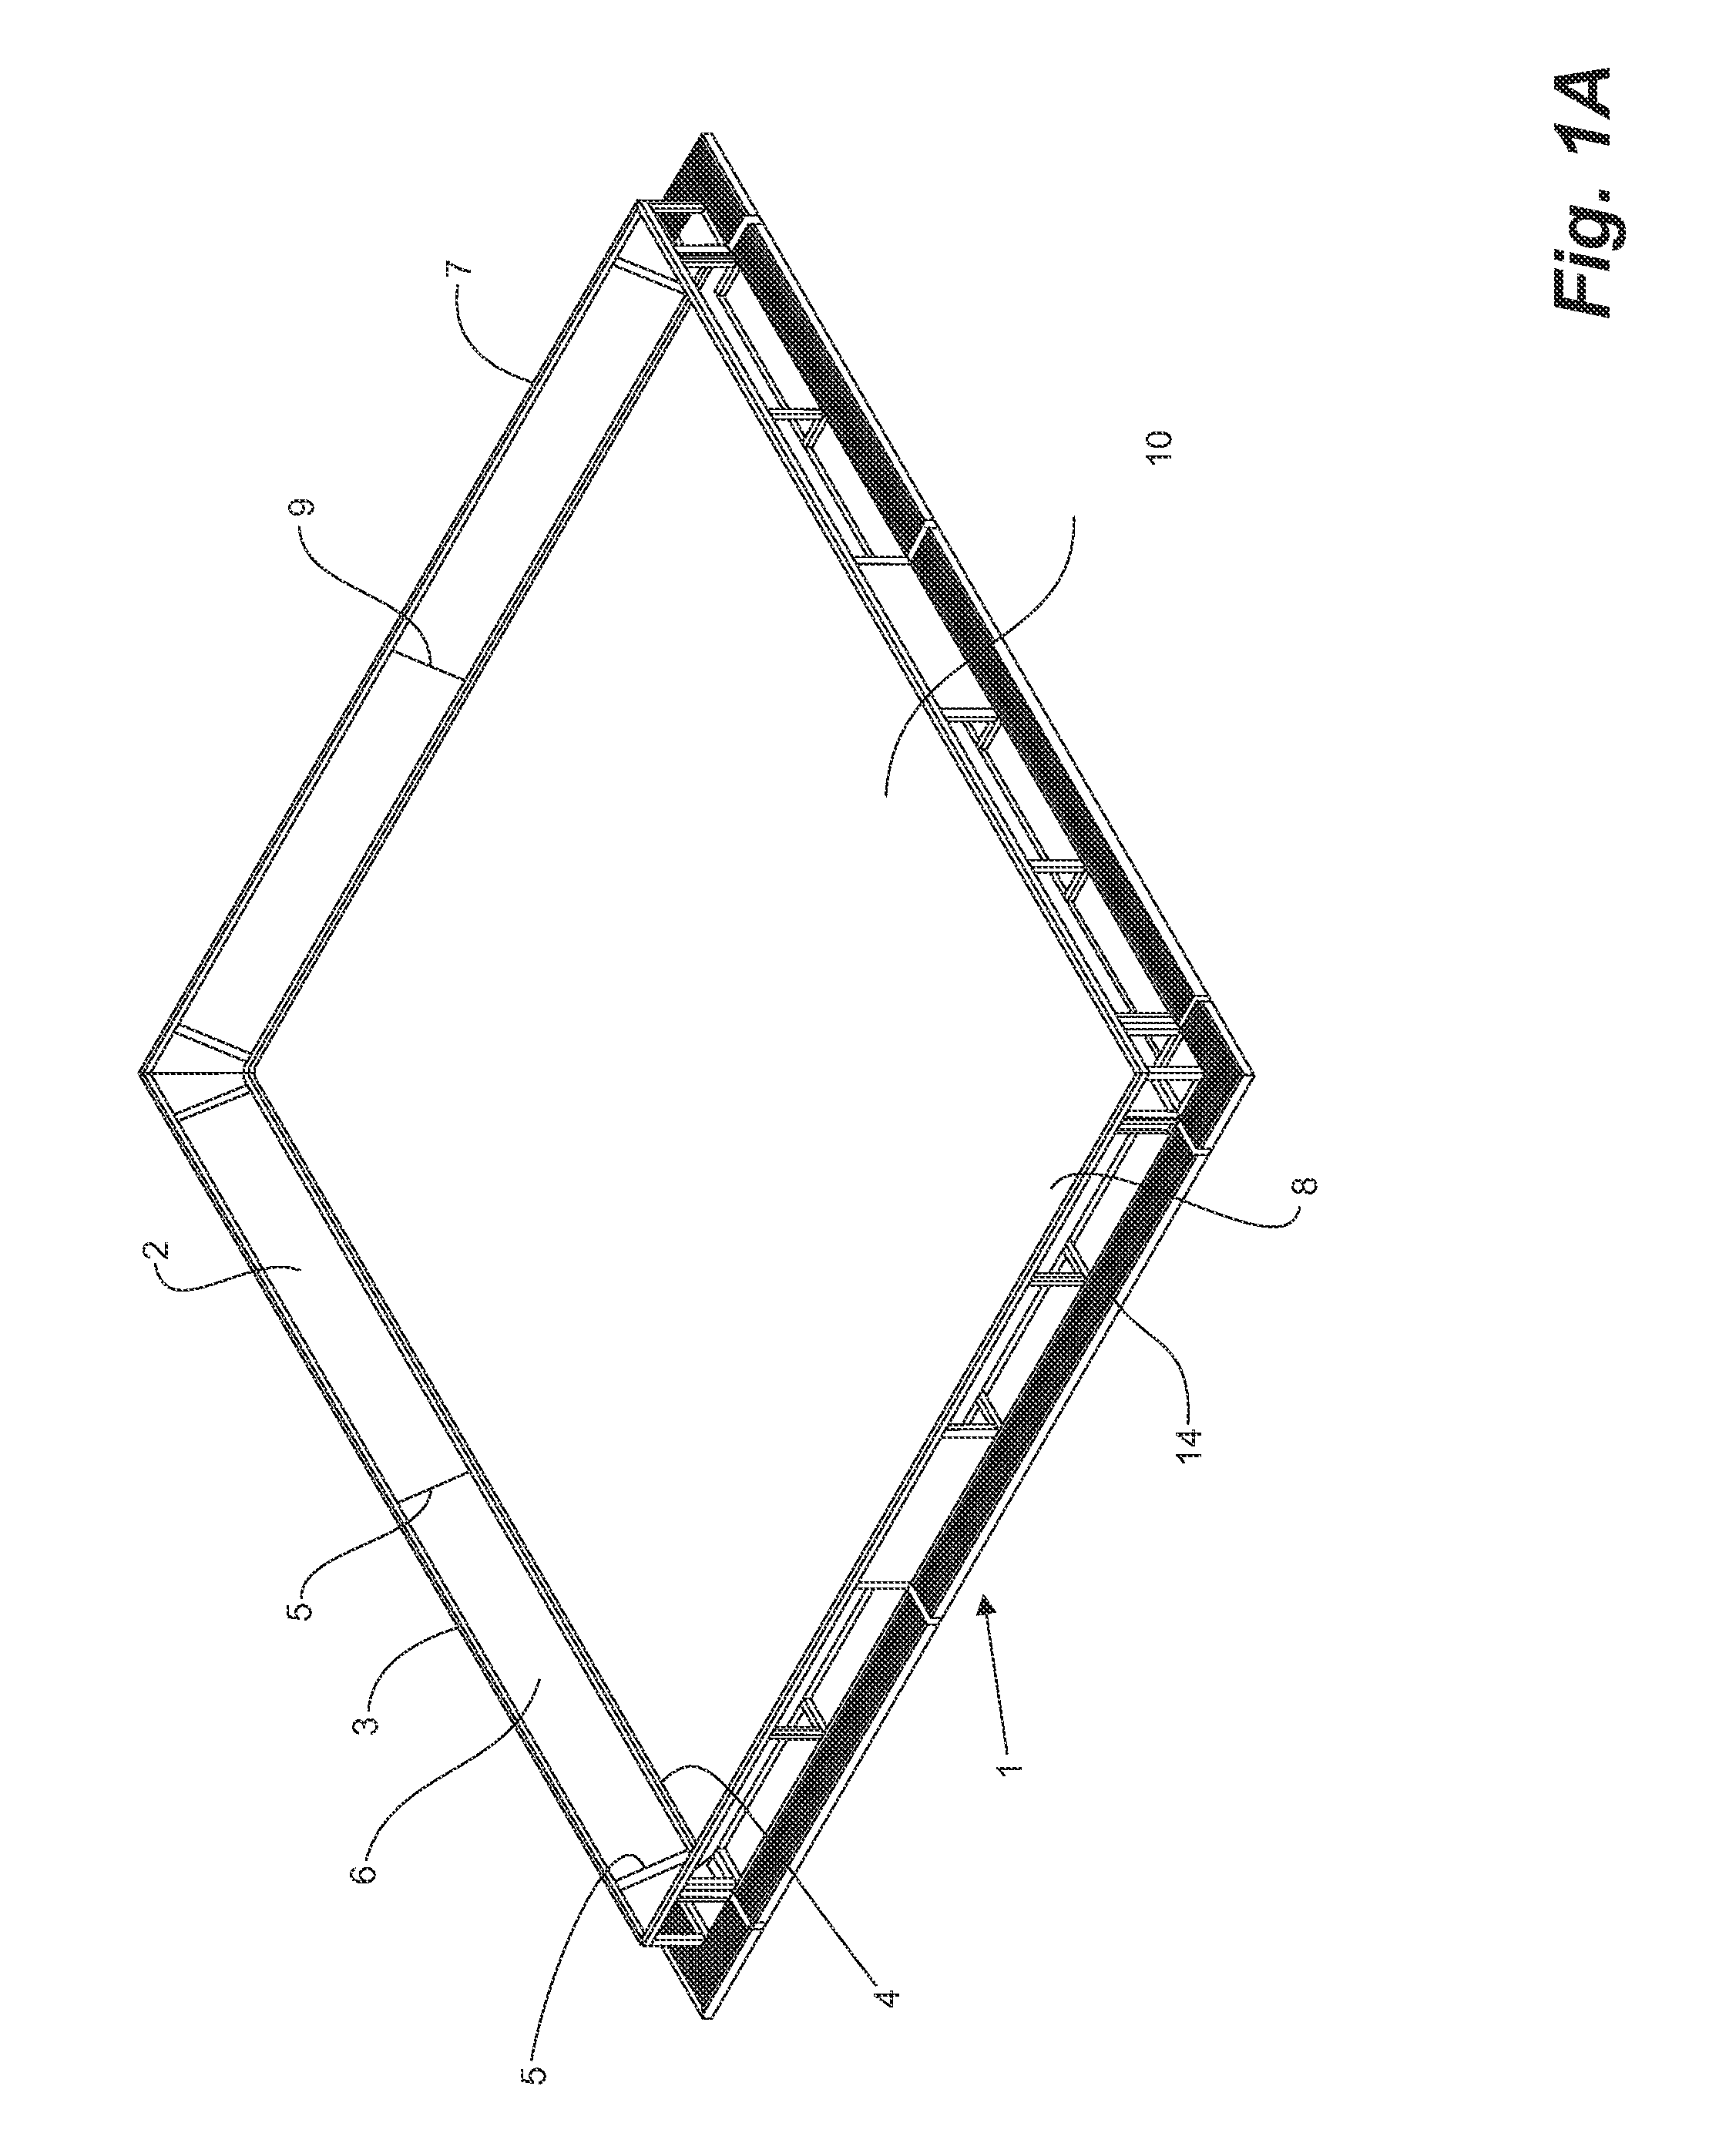 Modular berm system and method of assembly